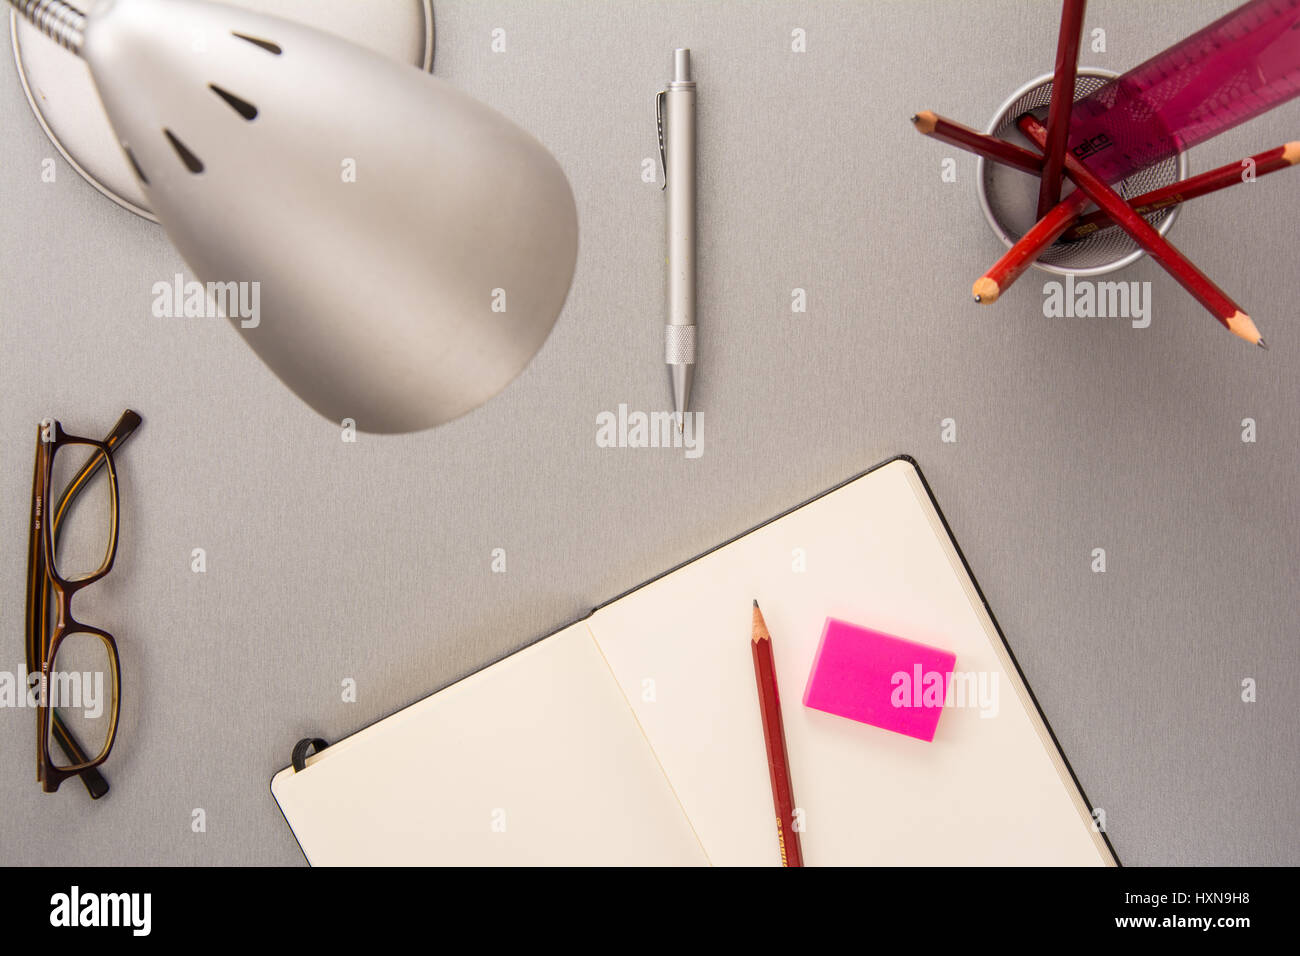 High angle view of a collection of desk elements such as pencils, notebook, lamp, eyeglasses, pen and eraser in a modern style Stock Photo